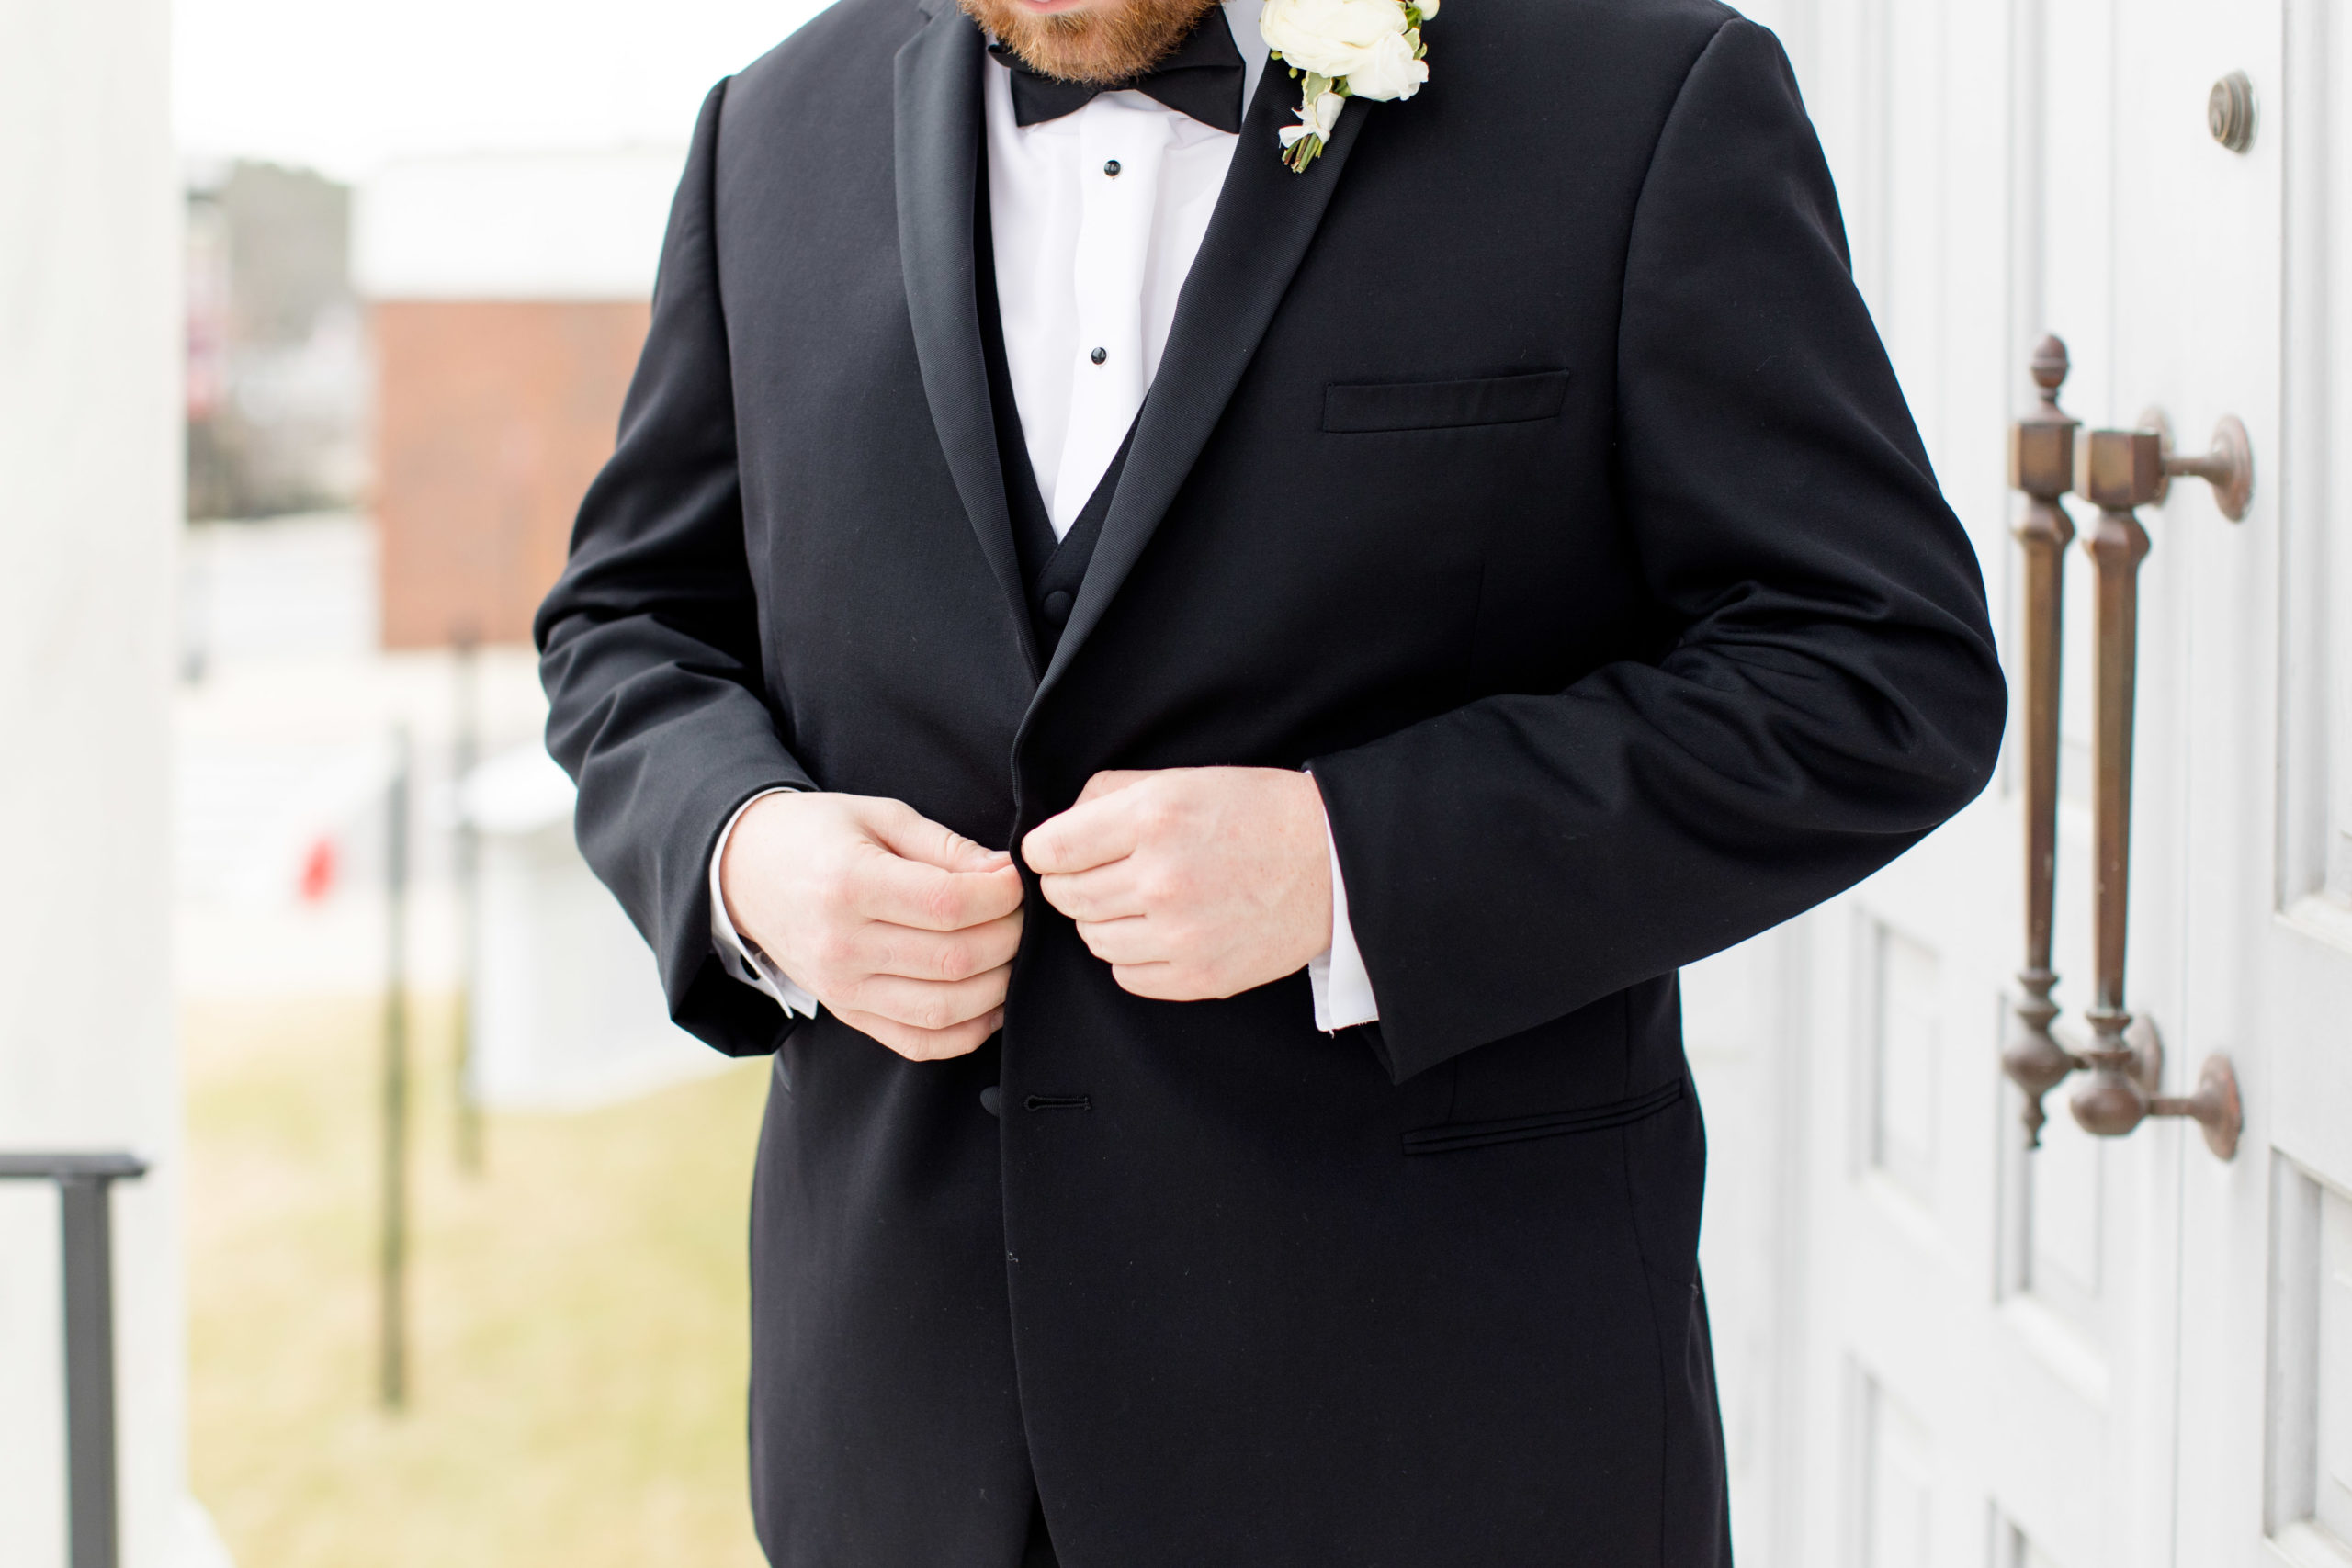 Groom buttons jacket.